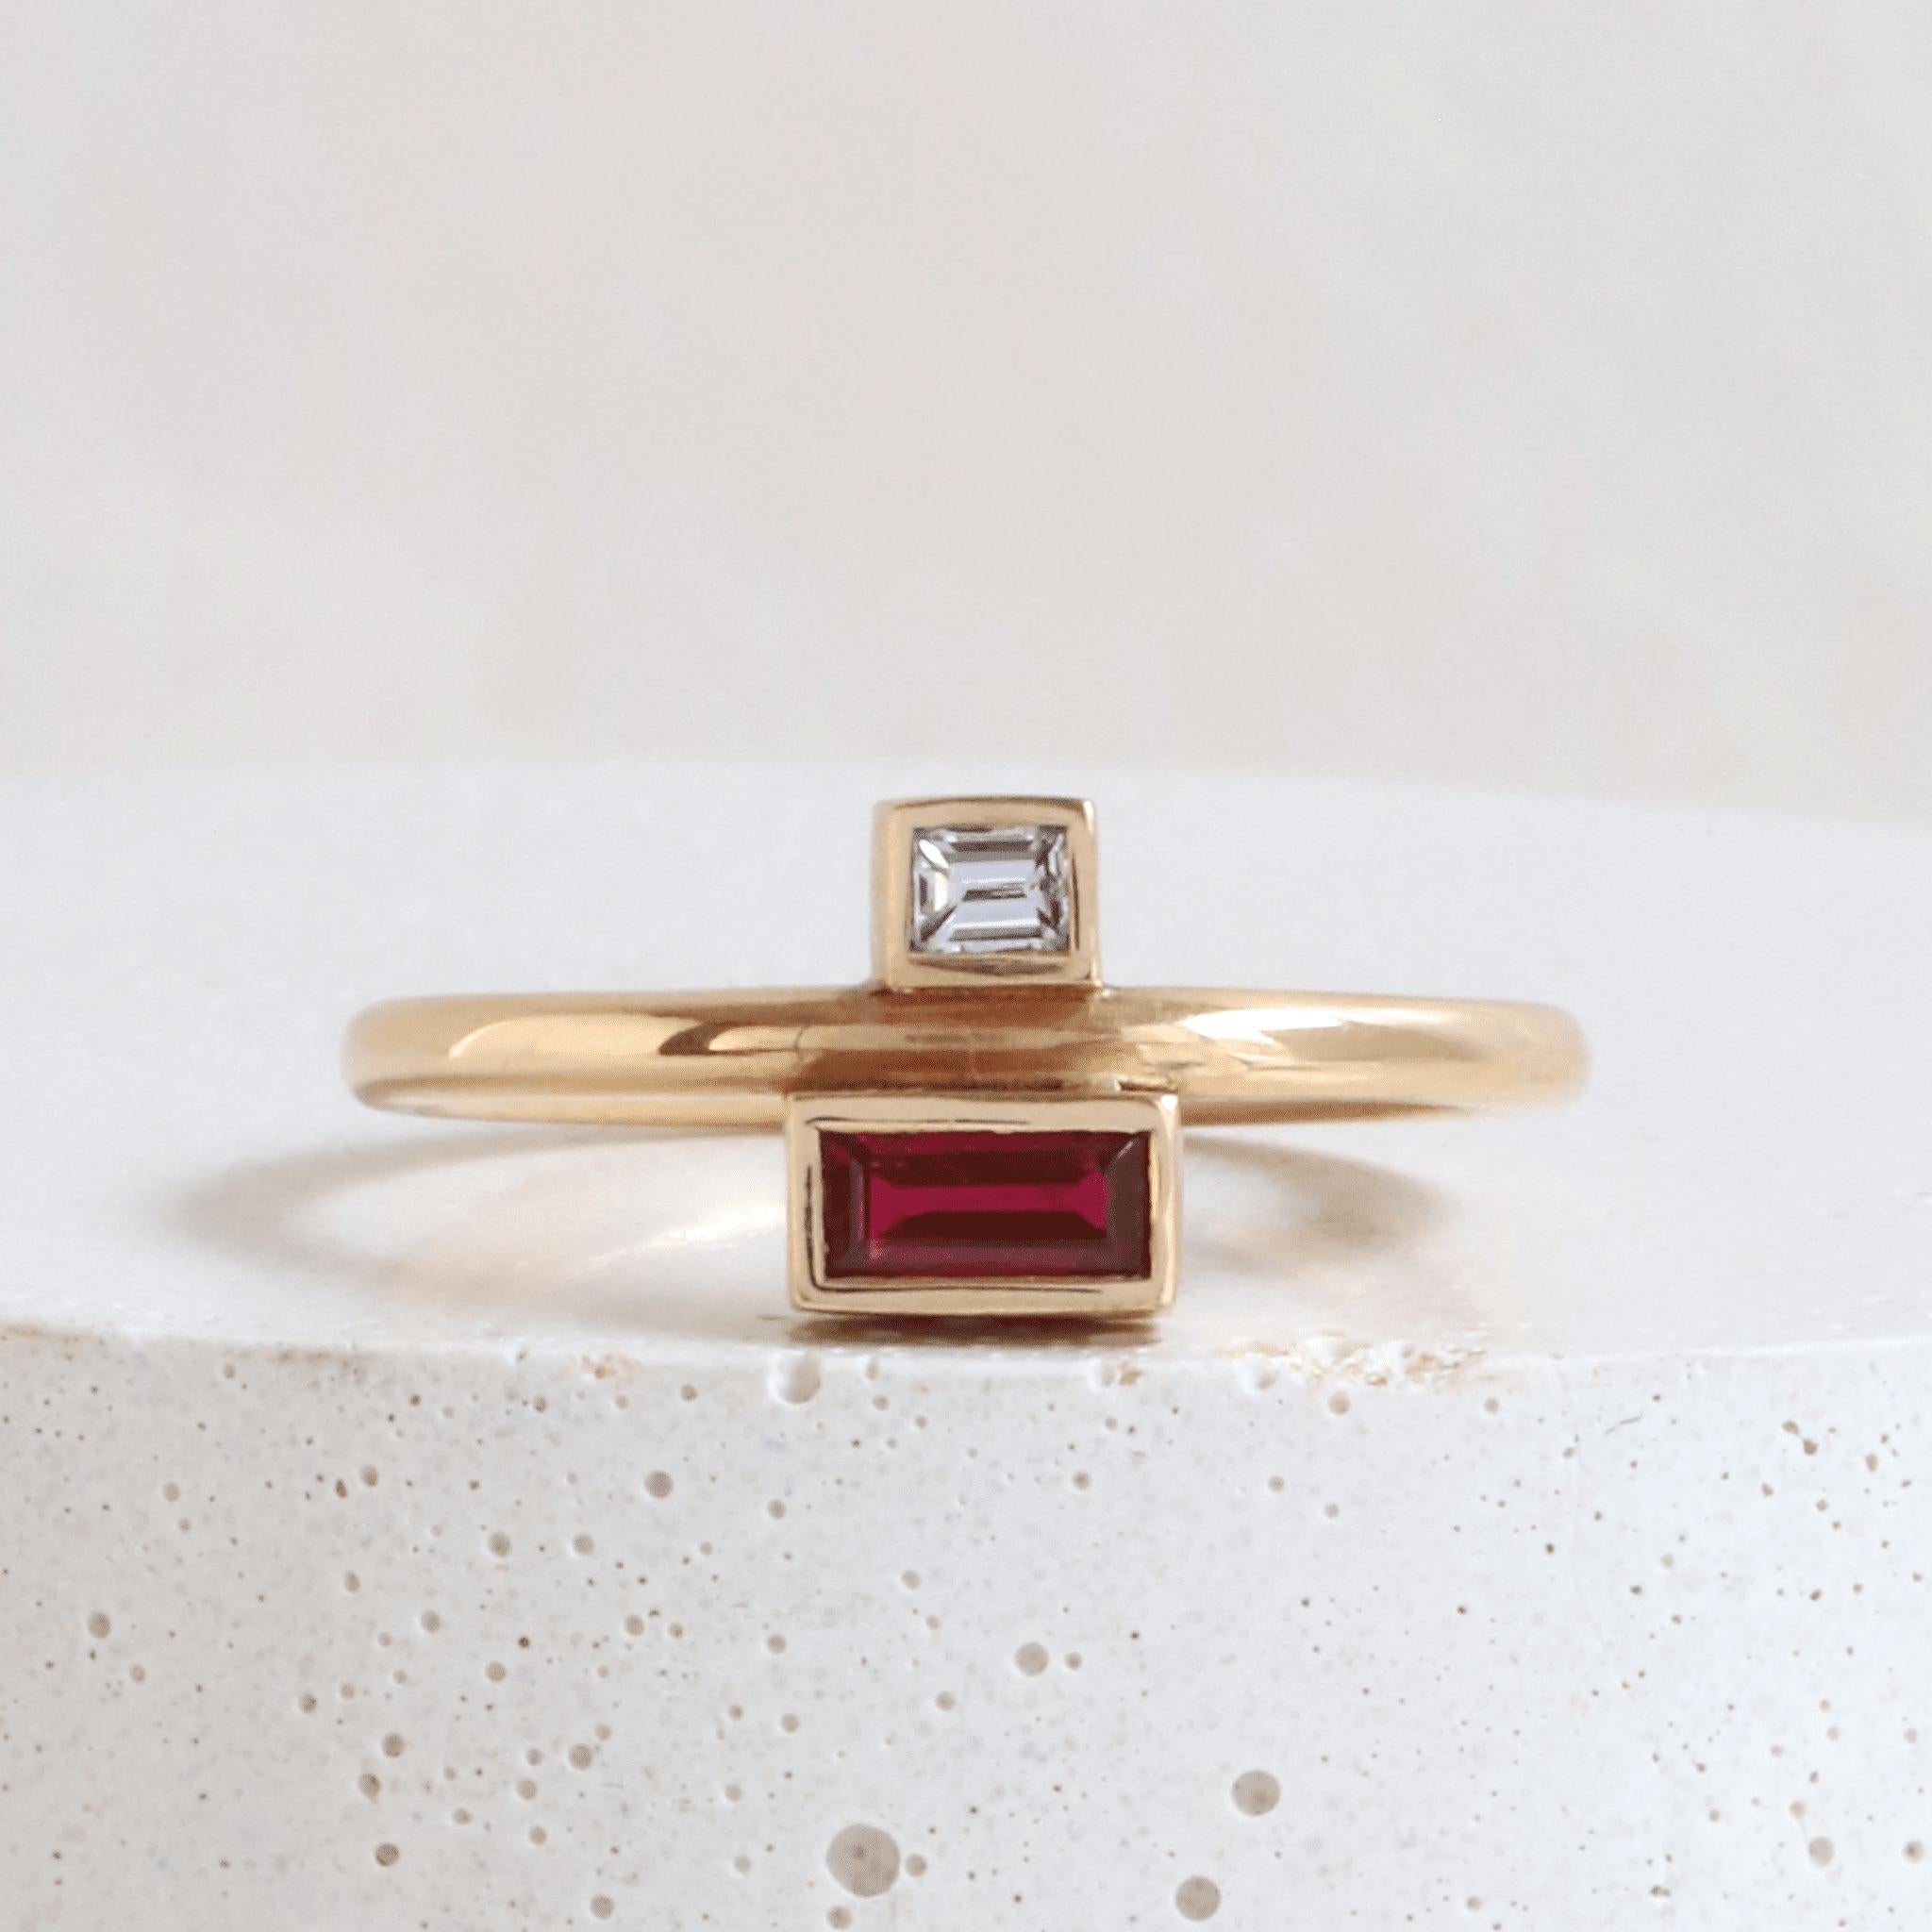 Ready to wear for any occasion, this contemporary piece is Art Deco inspired and minimalist in design. A richly toned rectangular ruby is complemented with a dainty baguette diamond. Set around a simple 18 karat recycled rose gold band, an